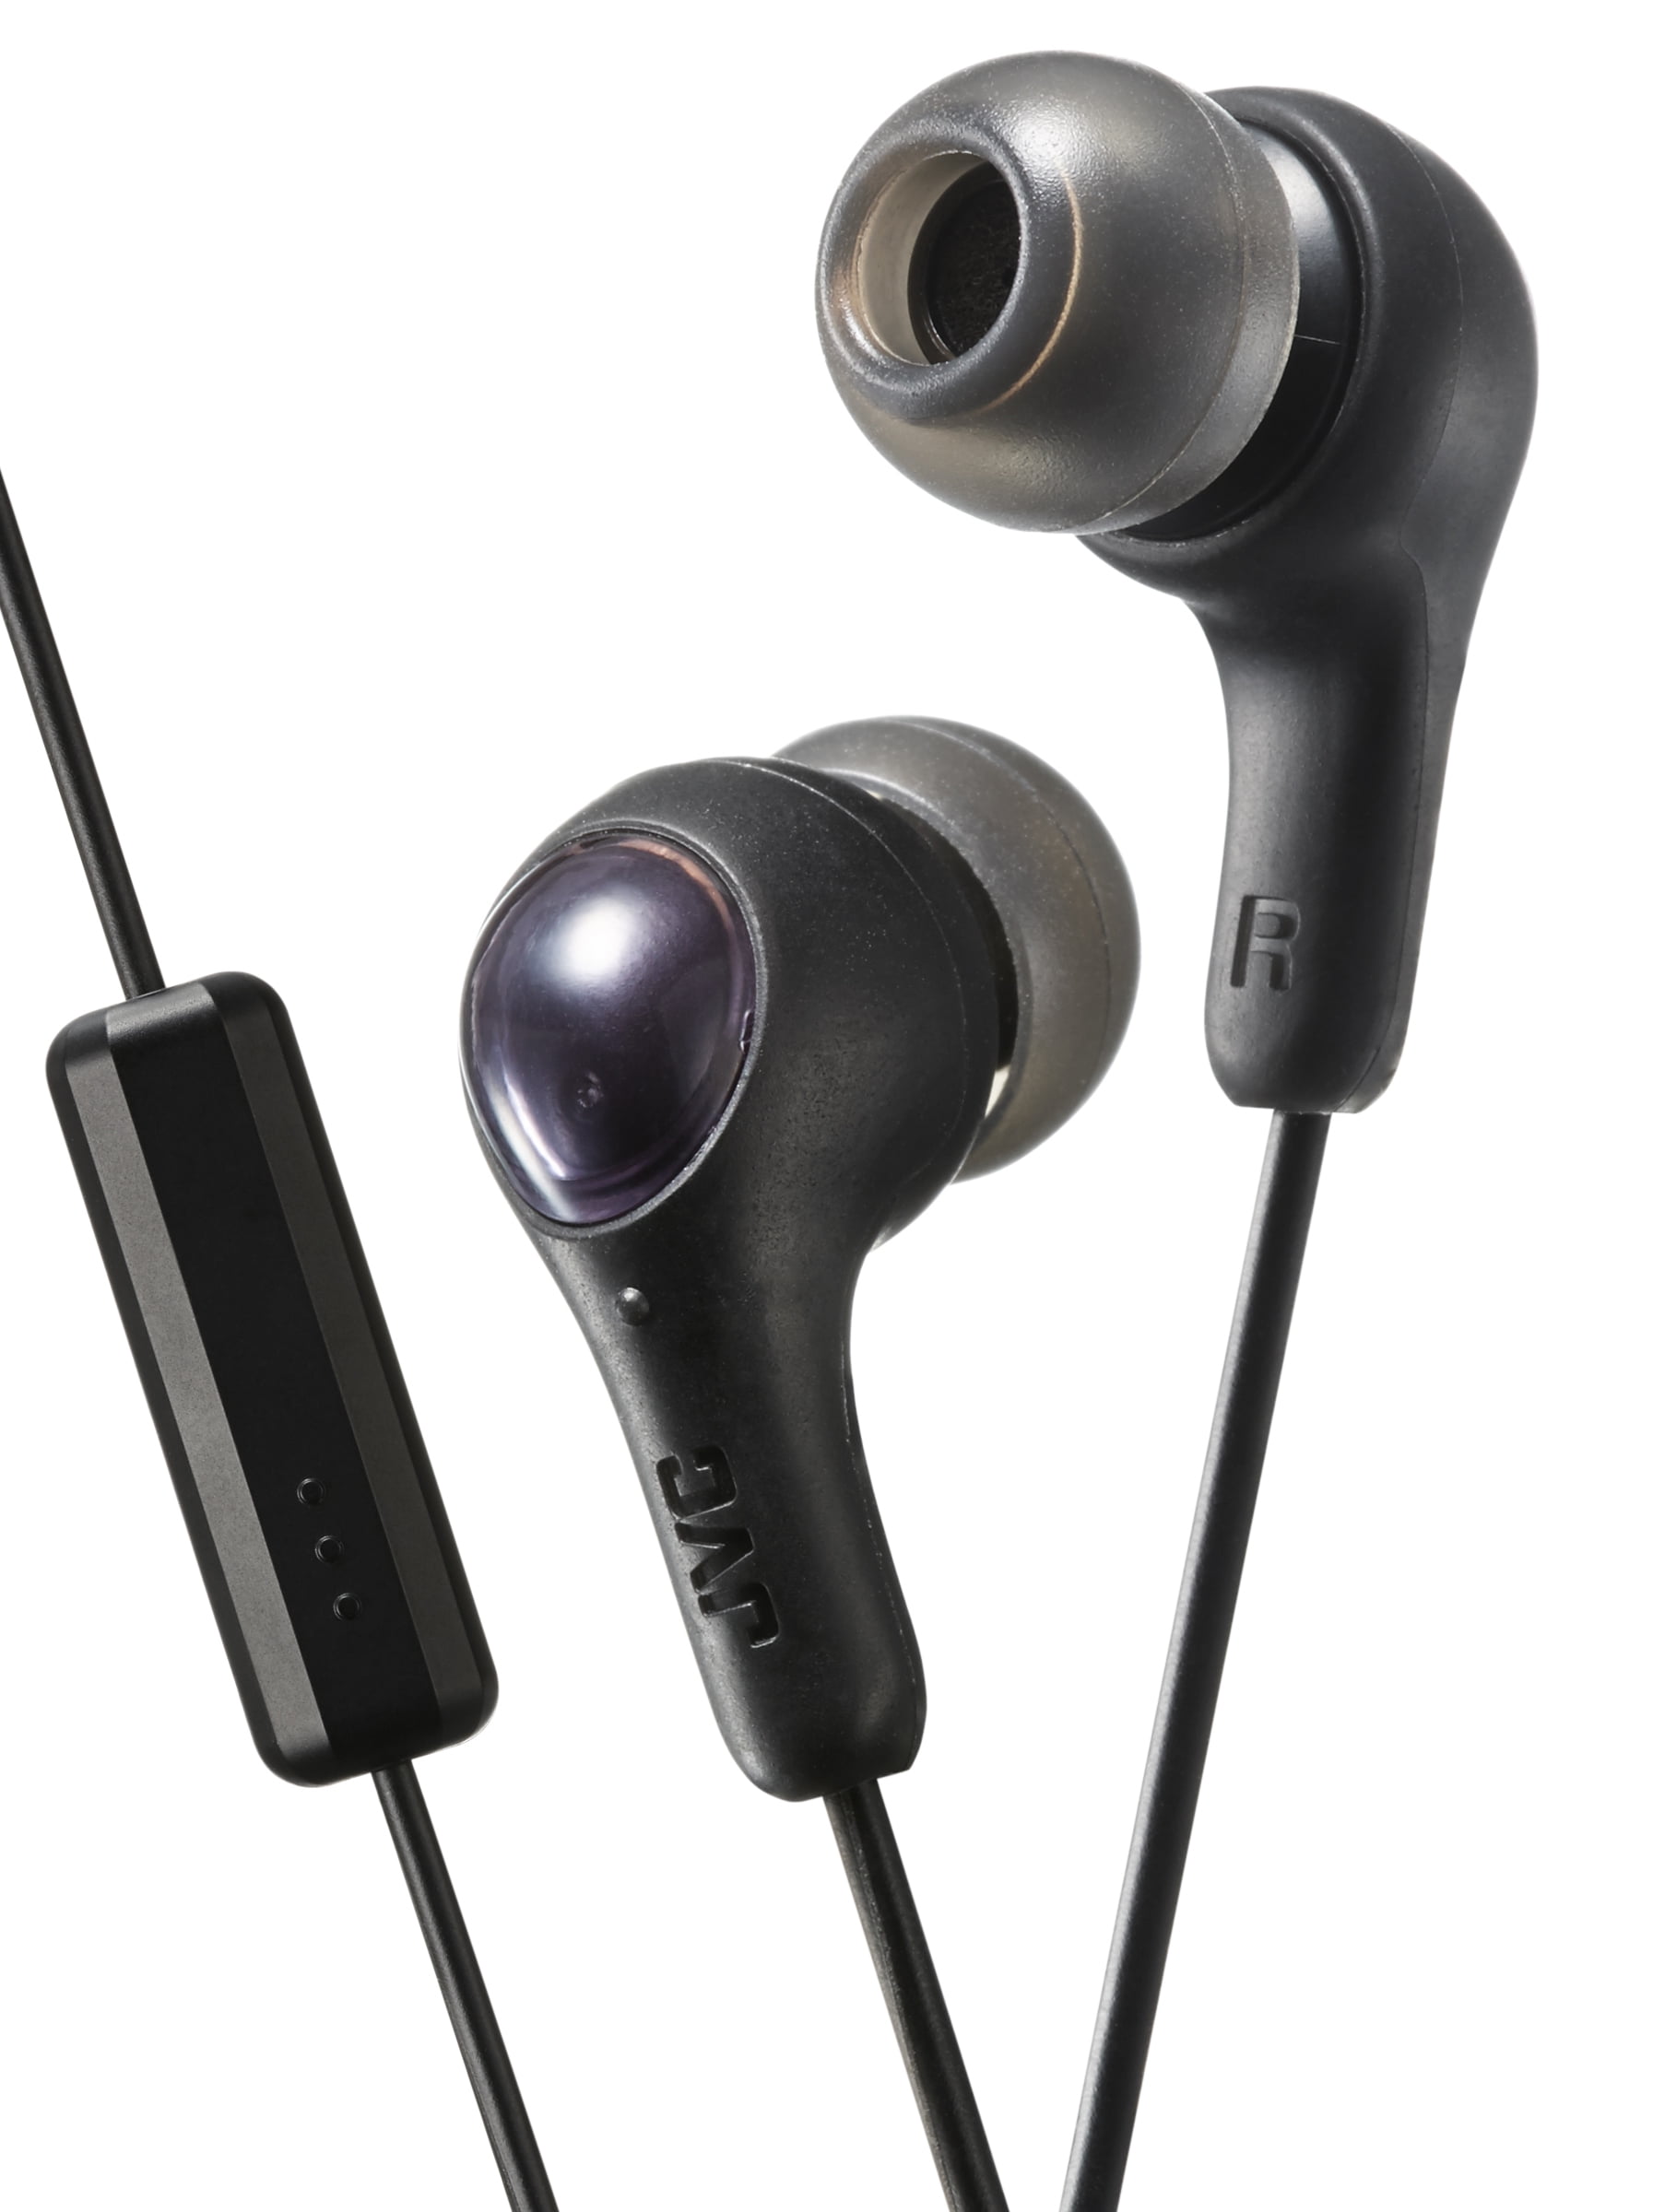 JVC Gumy Plus In Ear Earbuds Headphones with Mic and Remote, Powerful  Sound, Comfortable and Secure Fit - HAFX7MB (Black) 